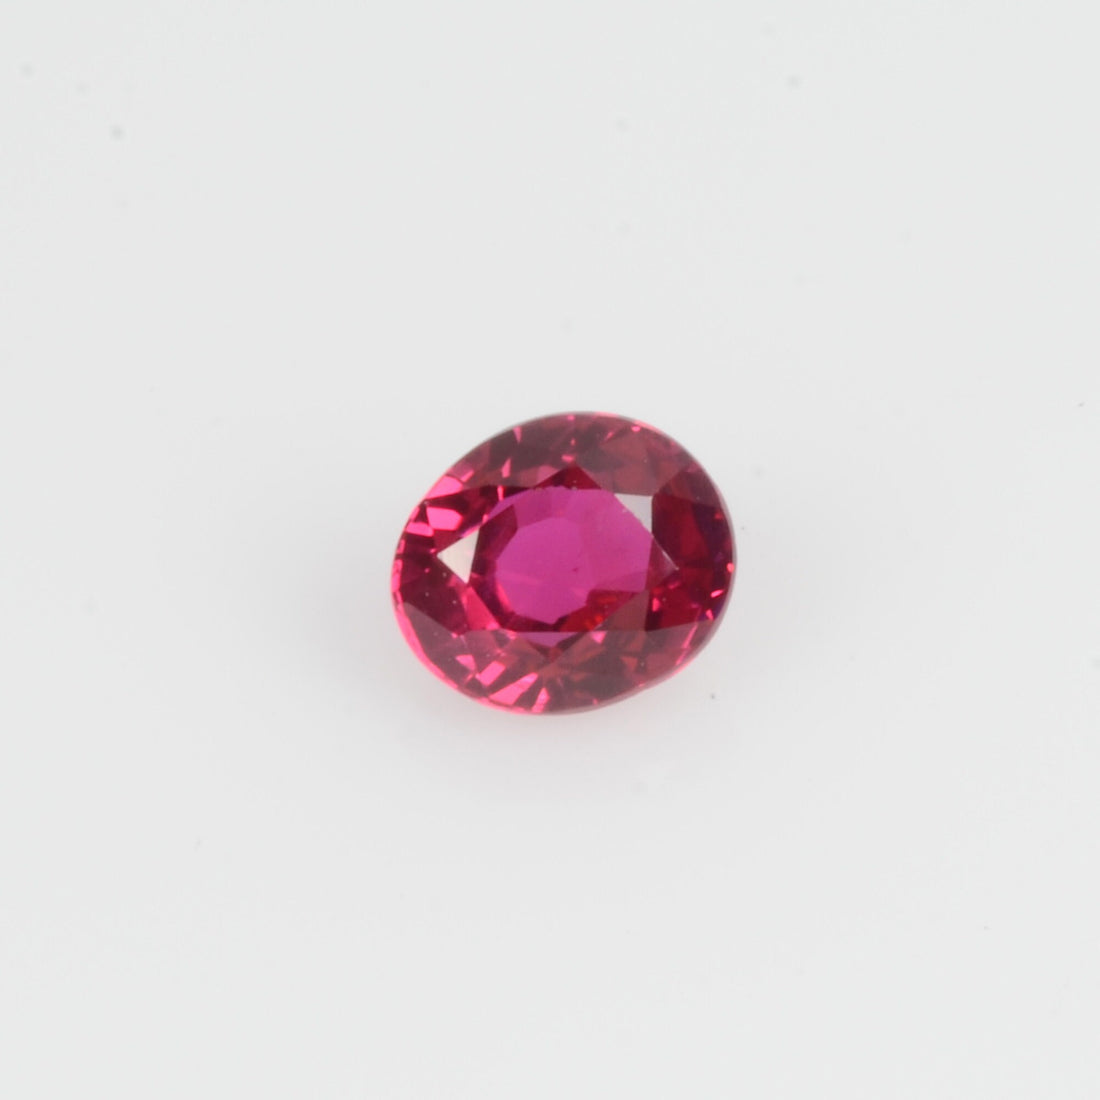 0.25 Cts Natural Ruby Loose Gemstone Oval Cut